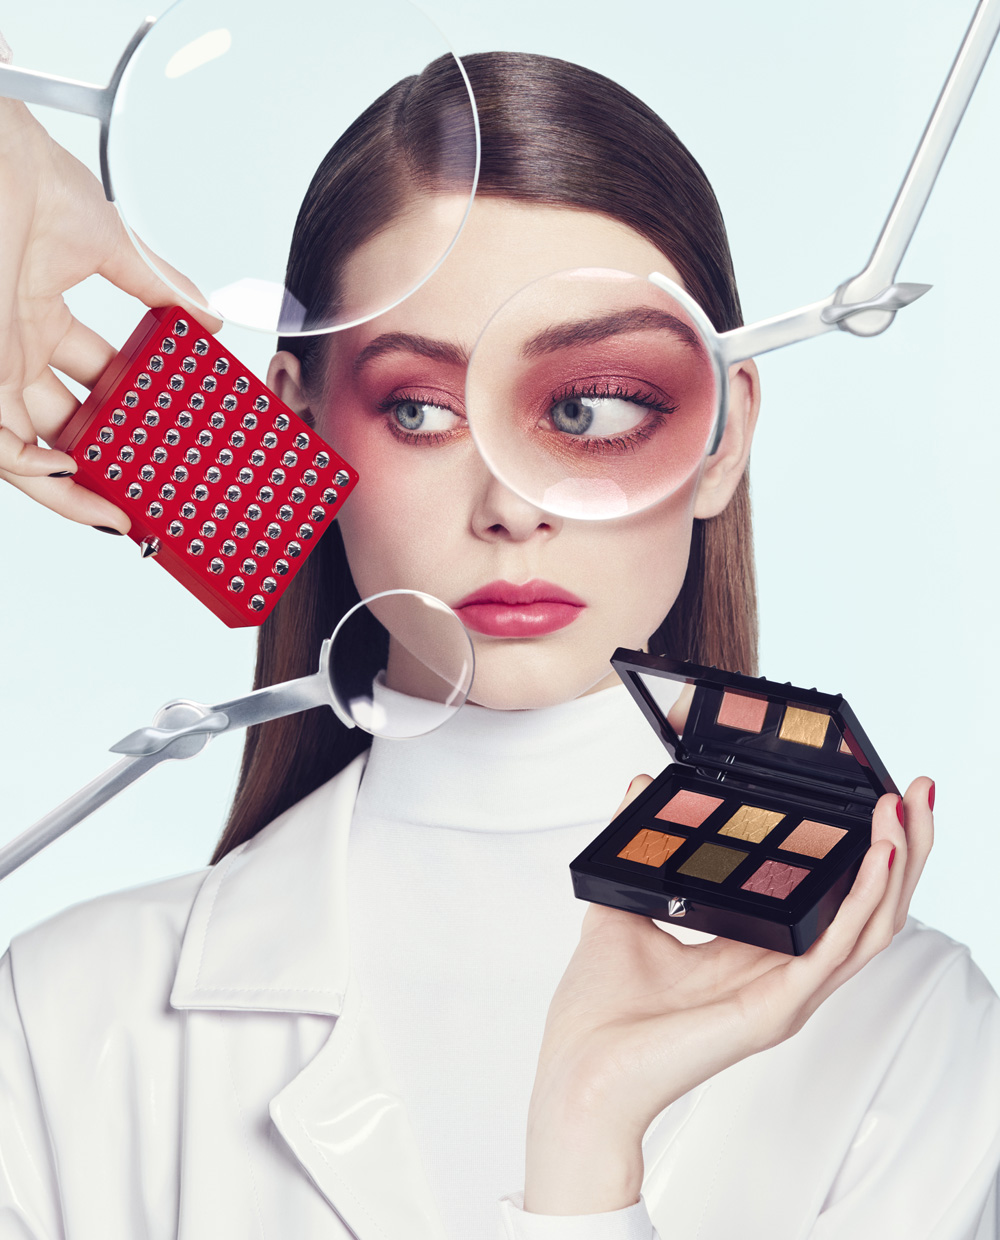 LOUBOUTIN MAKEUP COLLECTION - Beauty And The Dirt